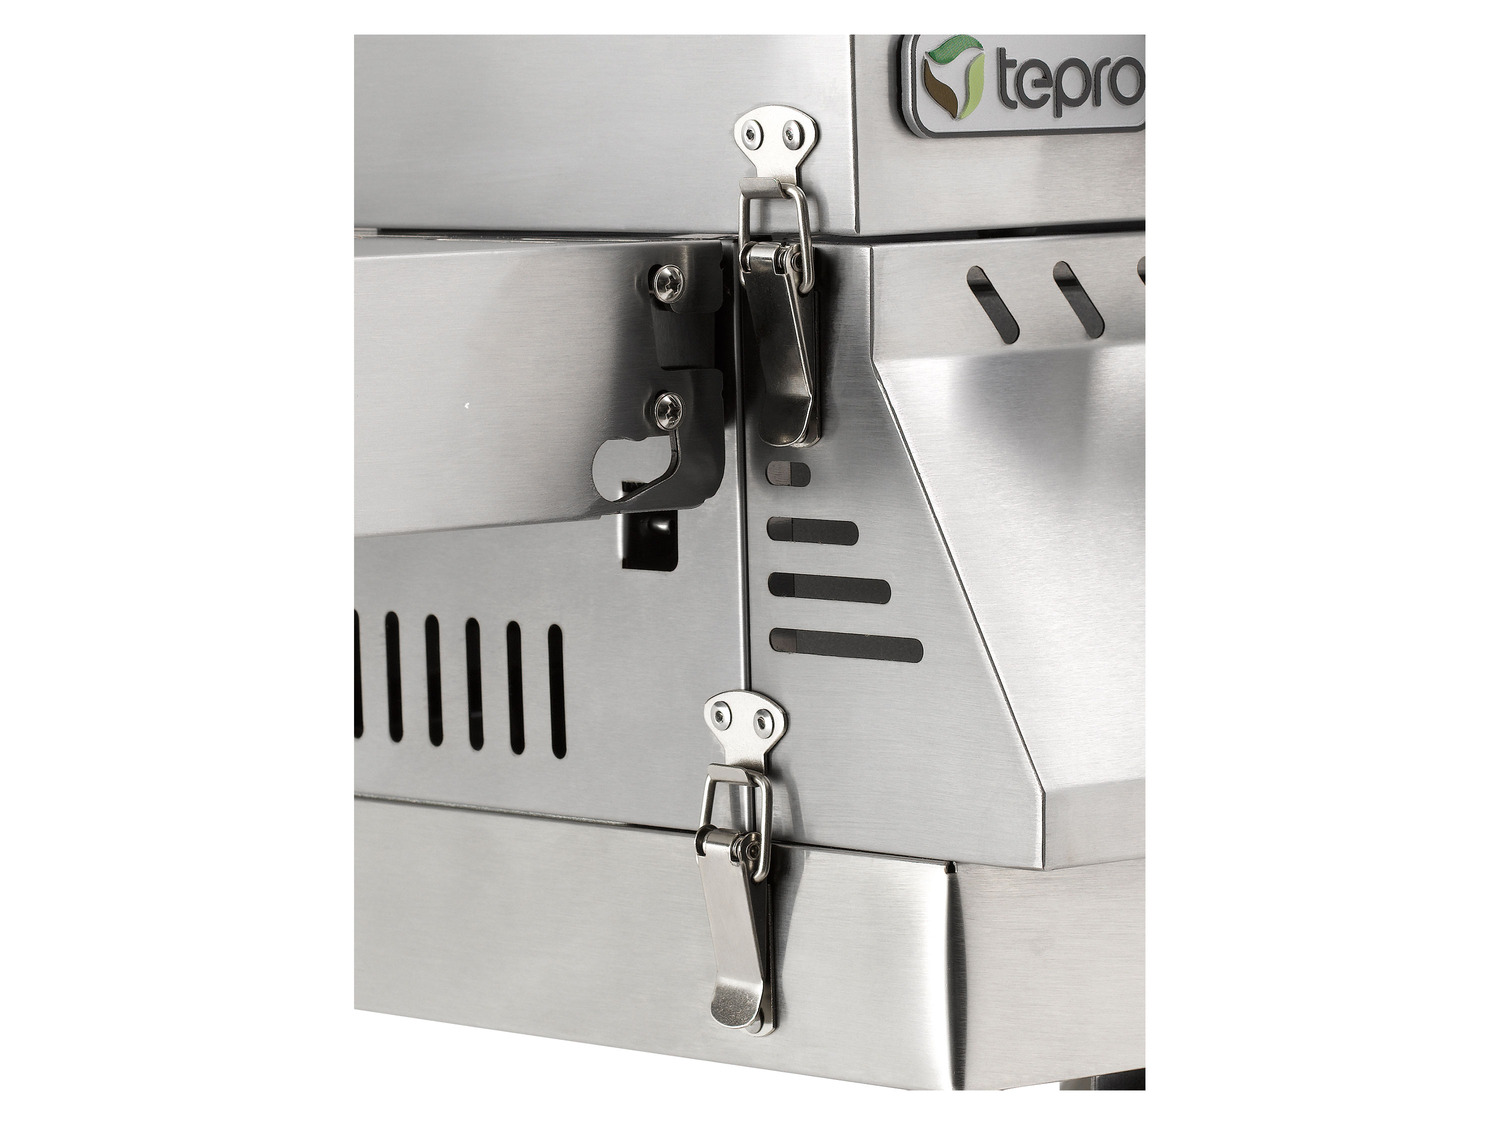 »Chicago« Gasgrill Edition, tepro 3 9… Brenner, Special